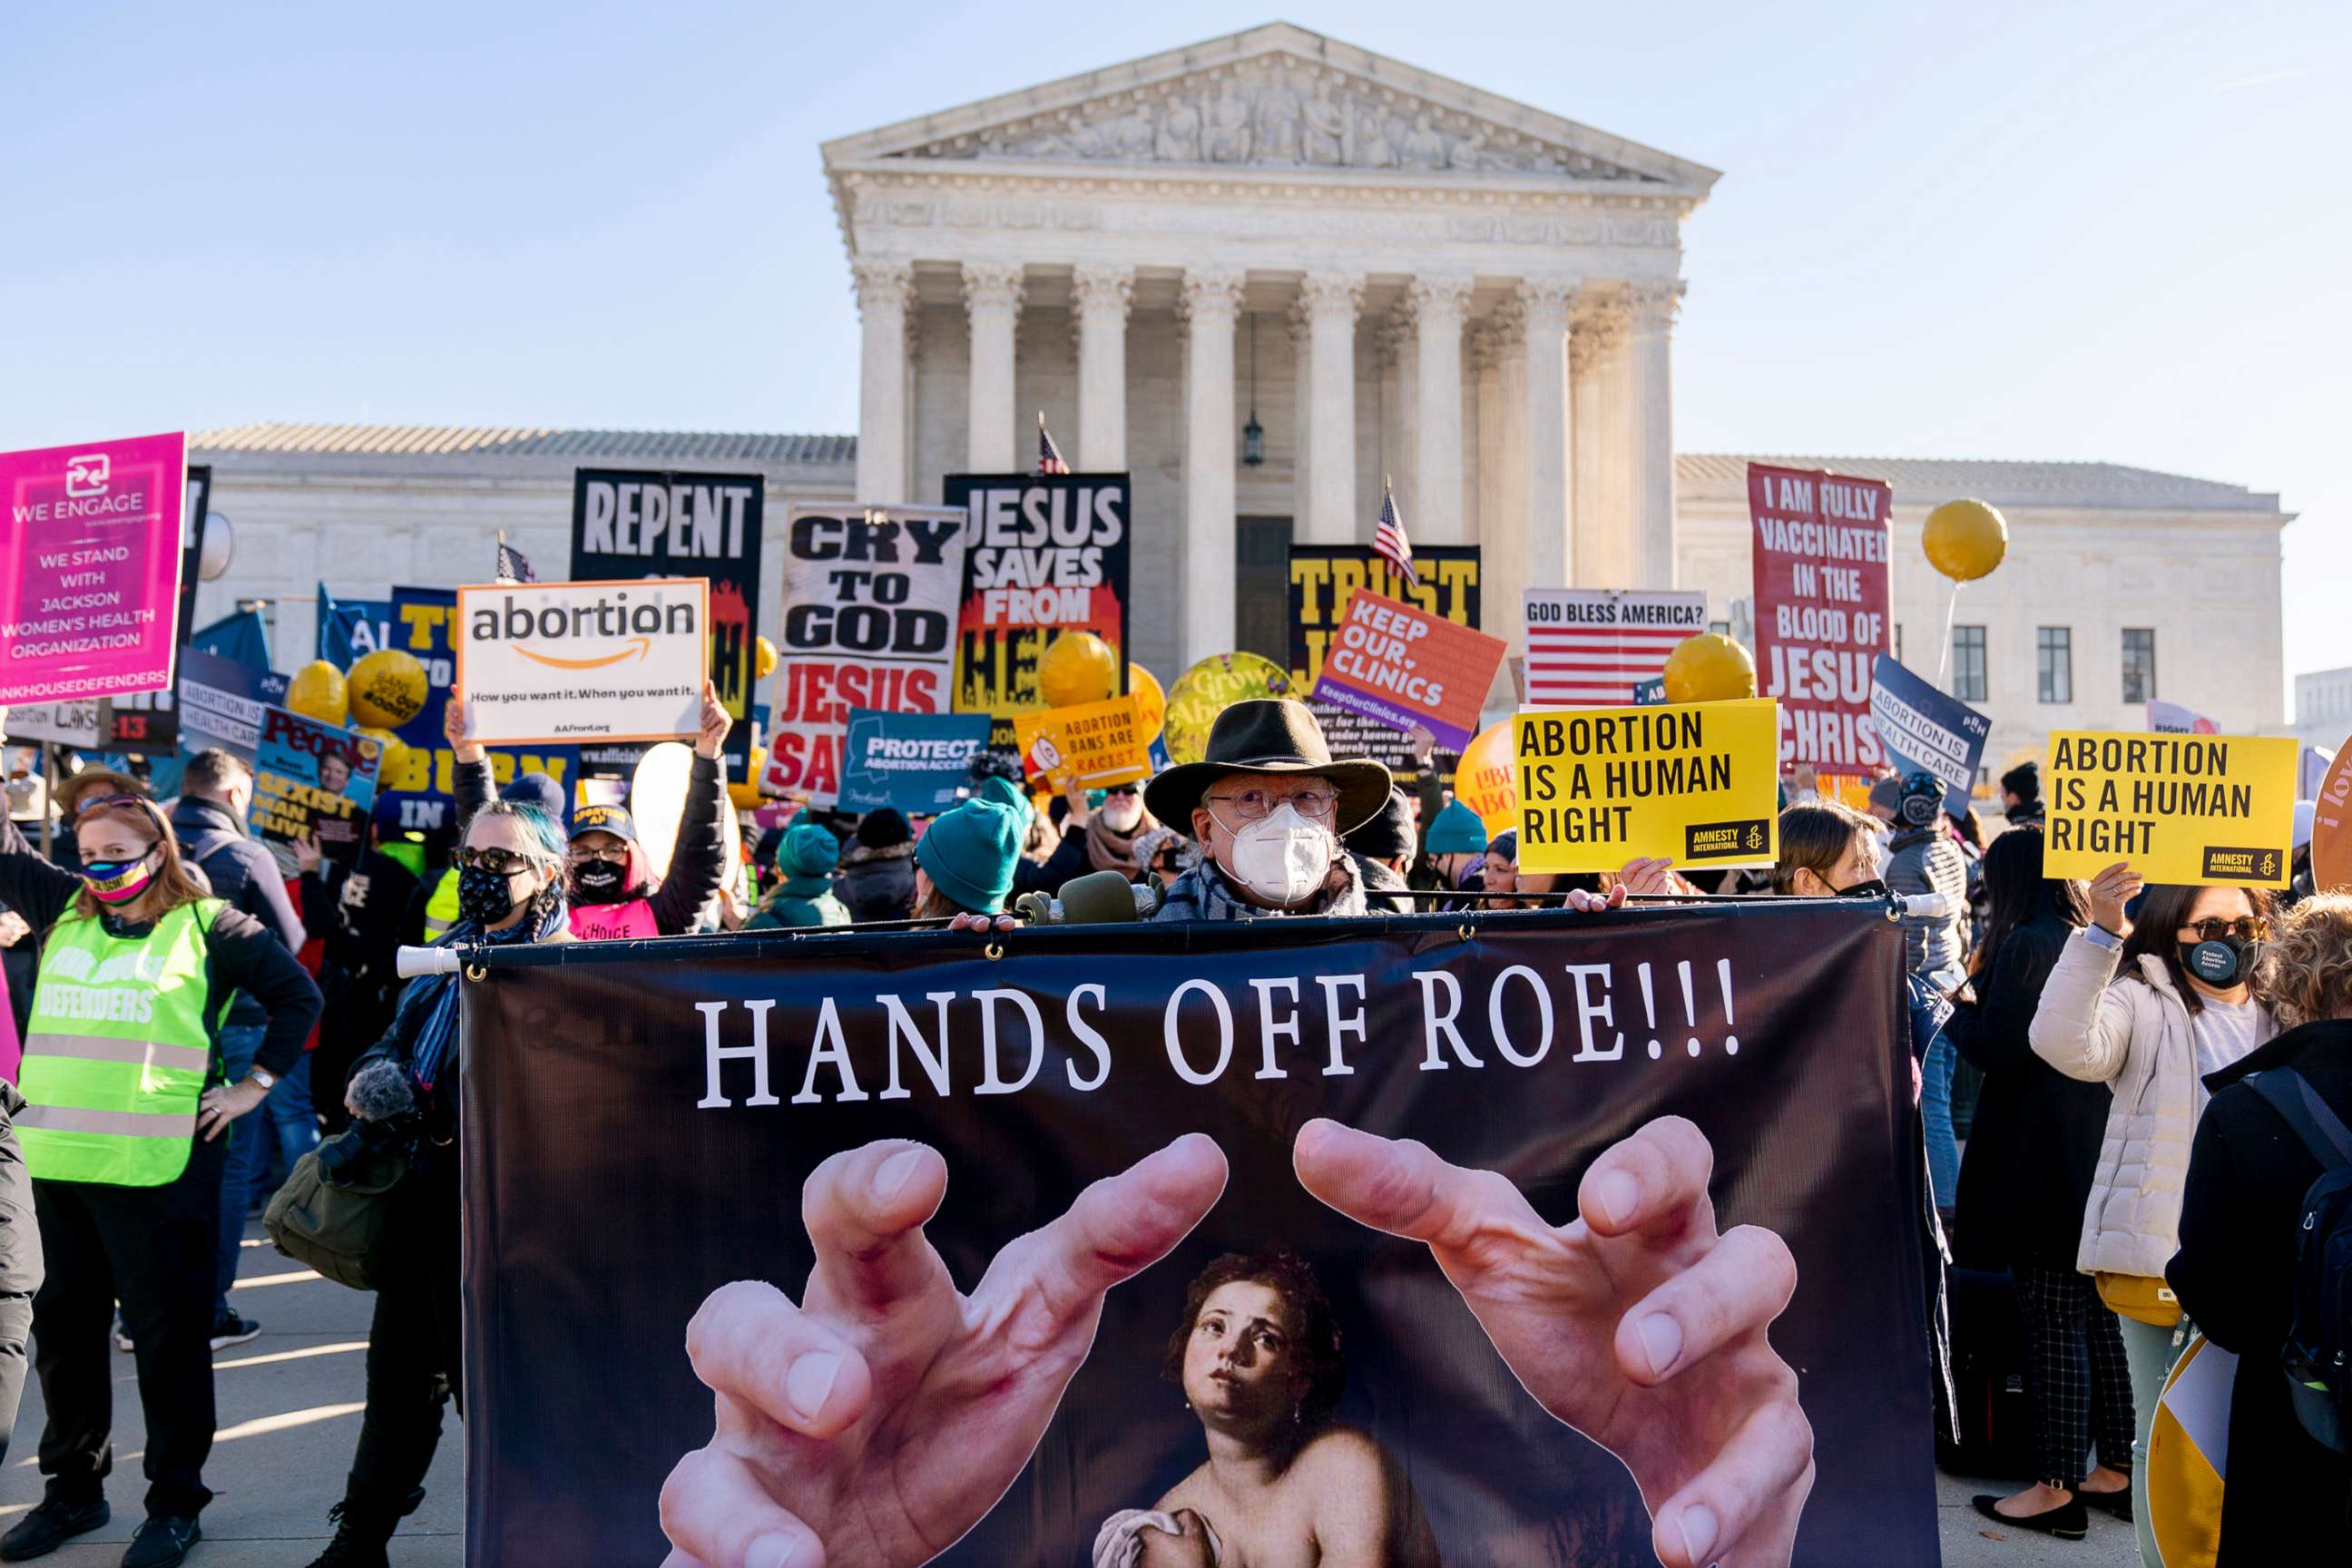 PHOTO: In this Dec. 1, 2021, file photo, Stephen Parlato of Boulder, Colo., holds a sign that reads "Hands Off Roe!!!" as abortion rights advocates and anti-abortion protesters demonstrate in front of the Supreme Court in Washington, D.C.